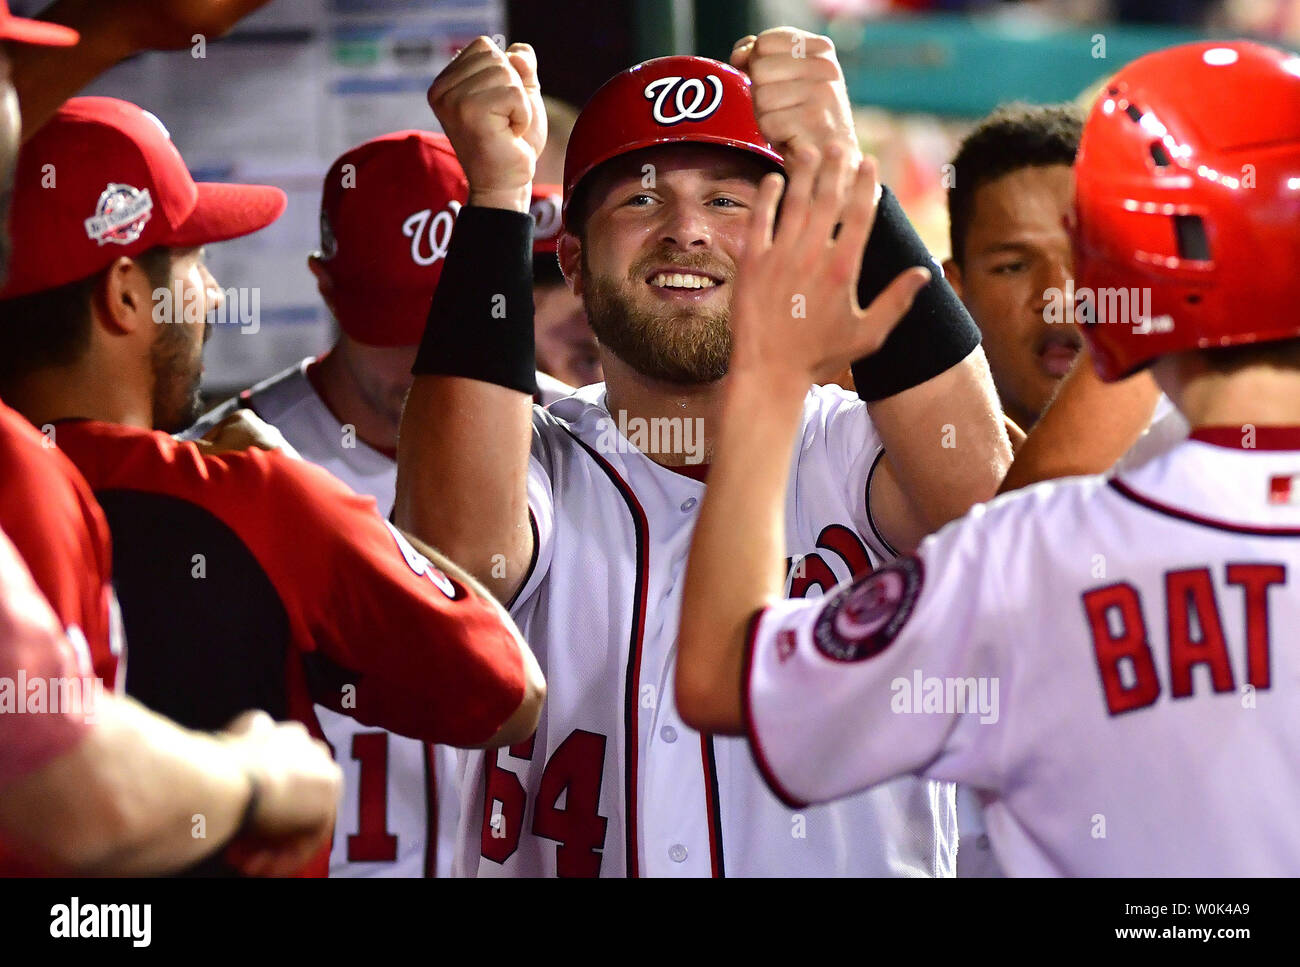 Washington Nationals catcher Spencer Kieboom celebrates in the dugout after scoring off of a single from Trea Turner against the Miami Marlins in the seventh inning at Nationals Park in Washington, D.C. on July 5, 2018. The Washington Nationals defeated the Miami Marlins 14-12. Photo by Kevin Dietsch/UPI Stock Photo